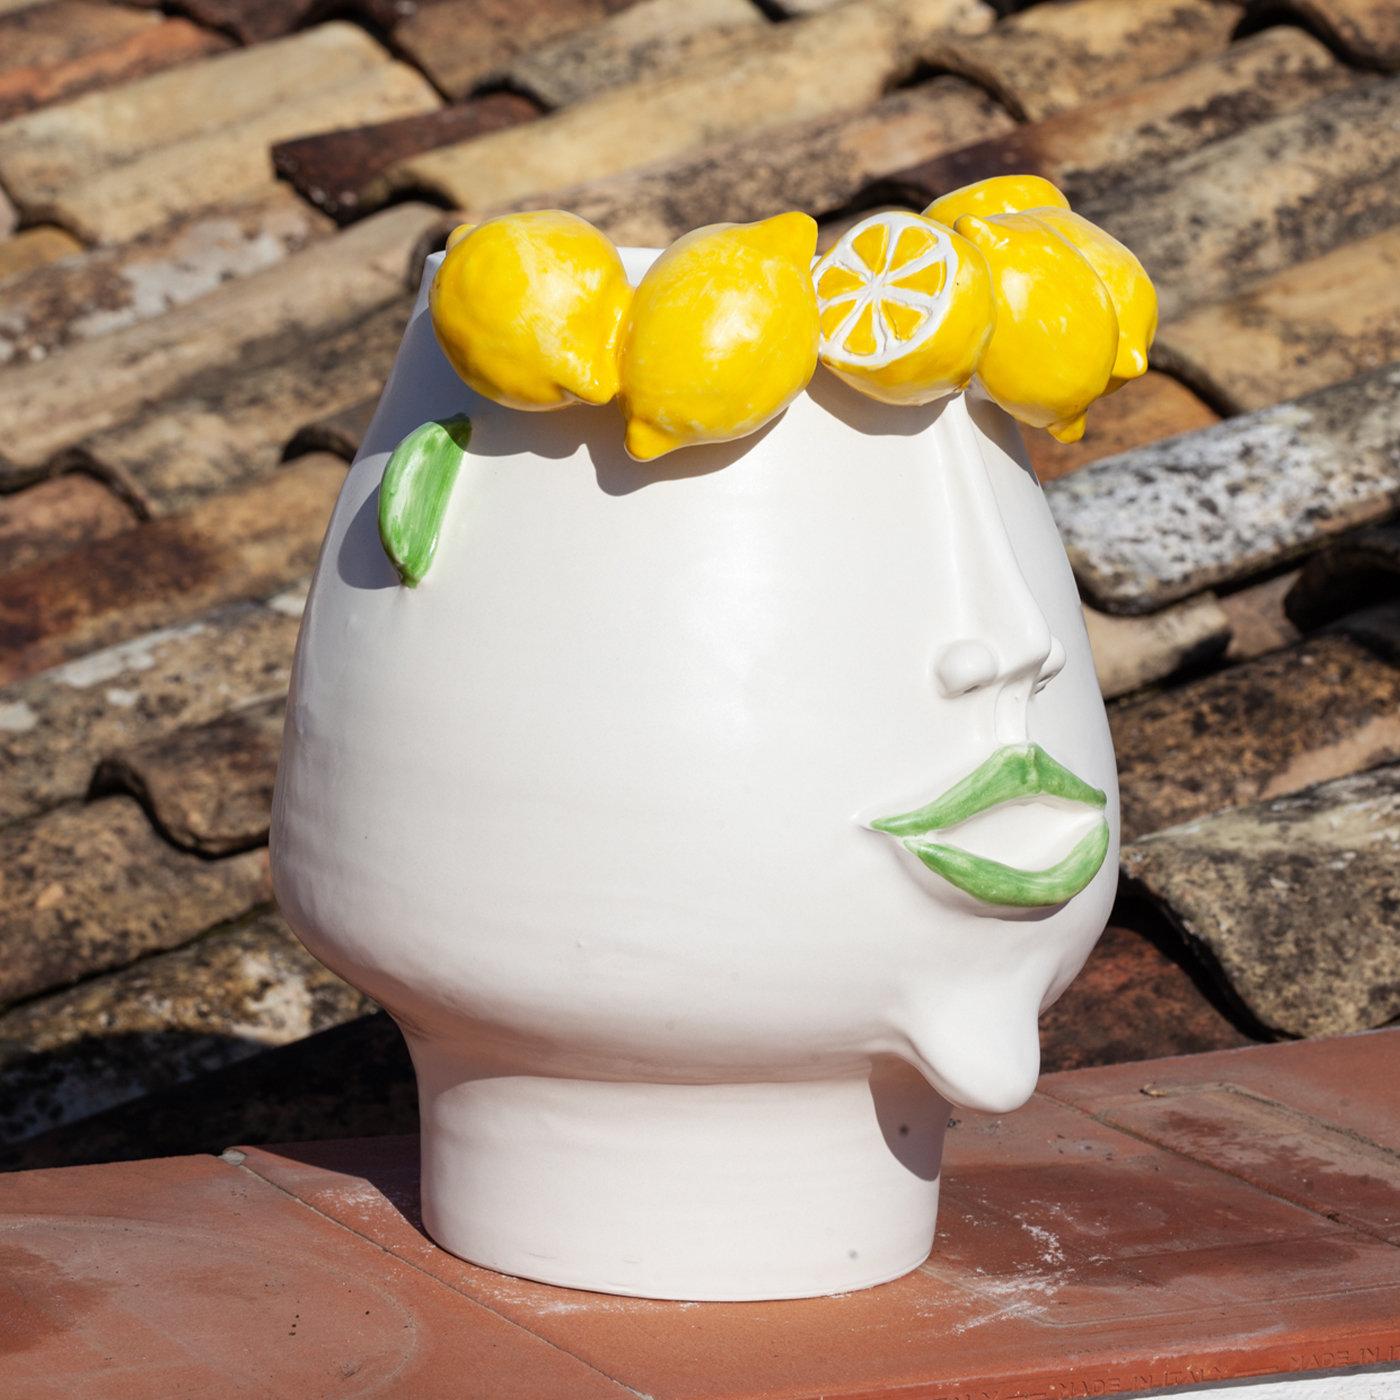 This exclusive head-shaped vase in fine white ceramic celebrates the authentic beauty of an hard yet fascinating job, the lemon picker. Ideal as vessel for both indoor or outdoor use, it depicts Domitilla, a Sicilian female lemon picker whose